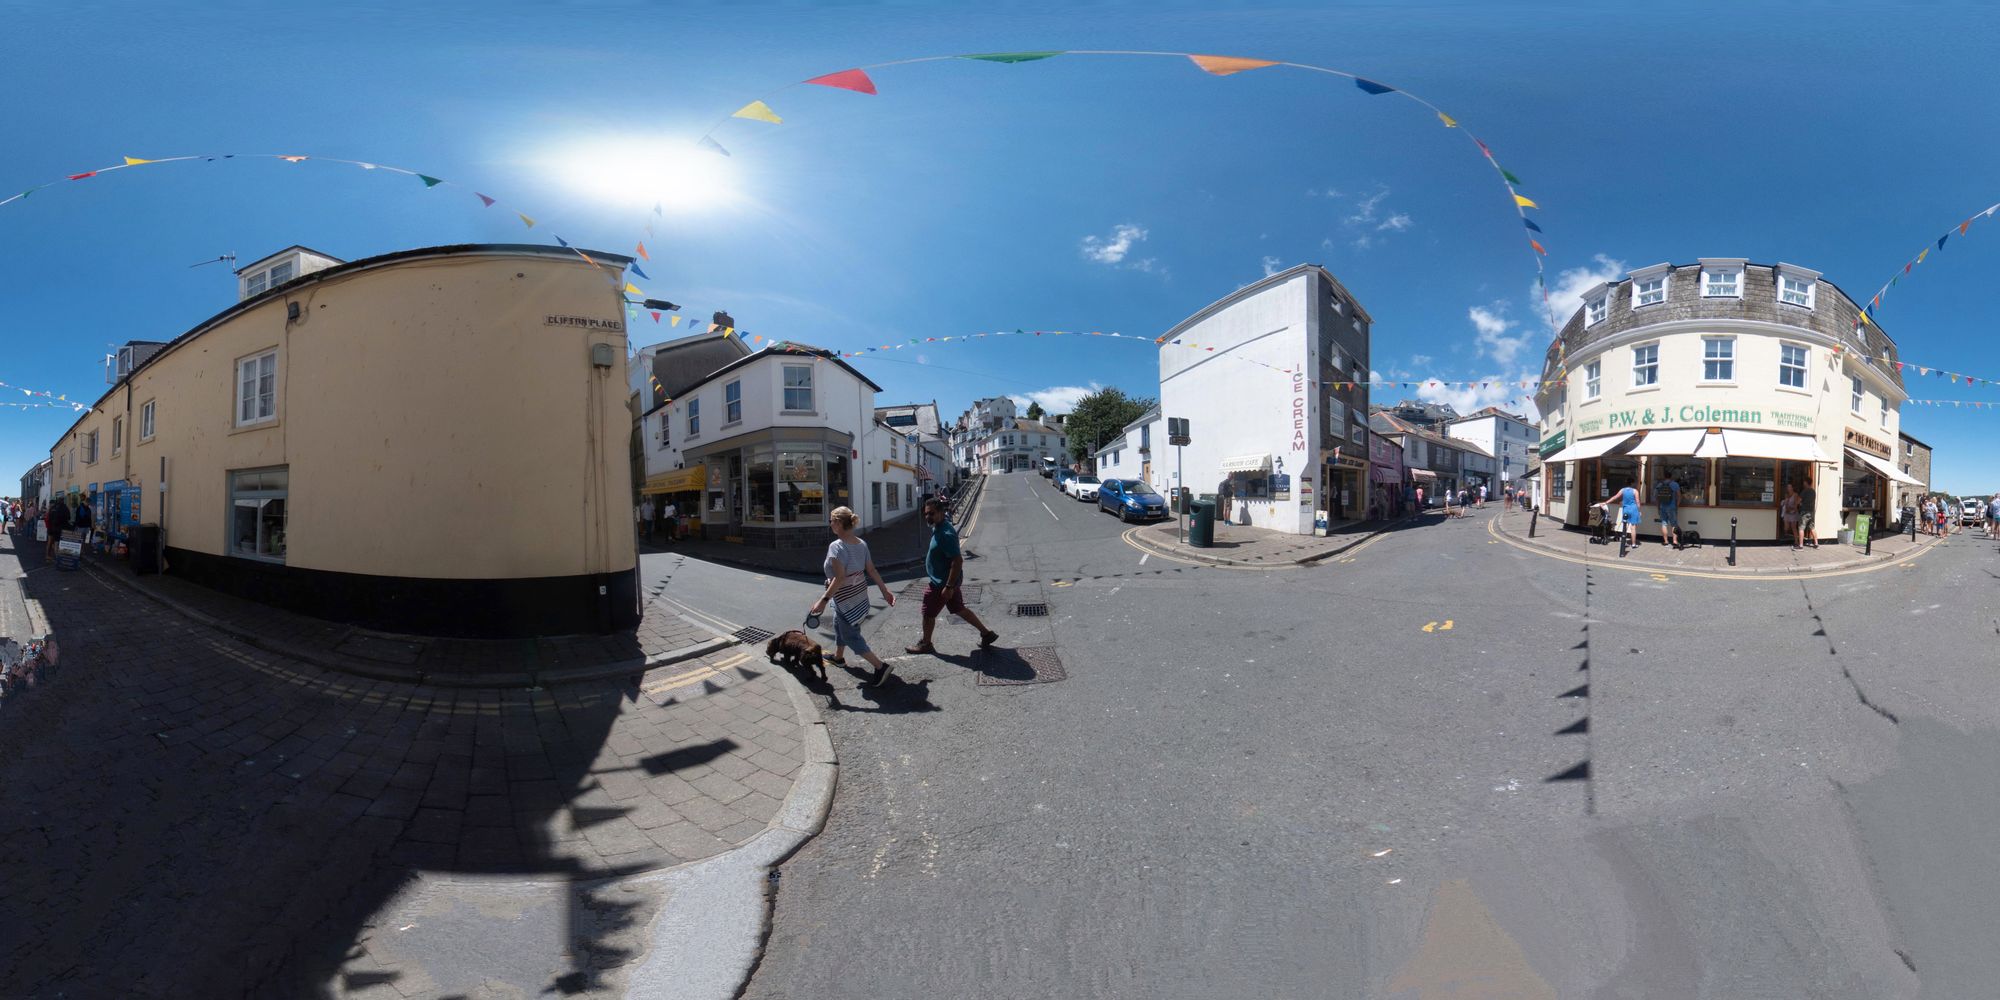 More 360° Pictures